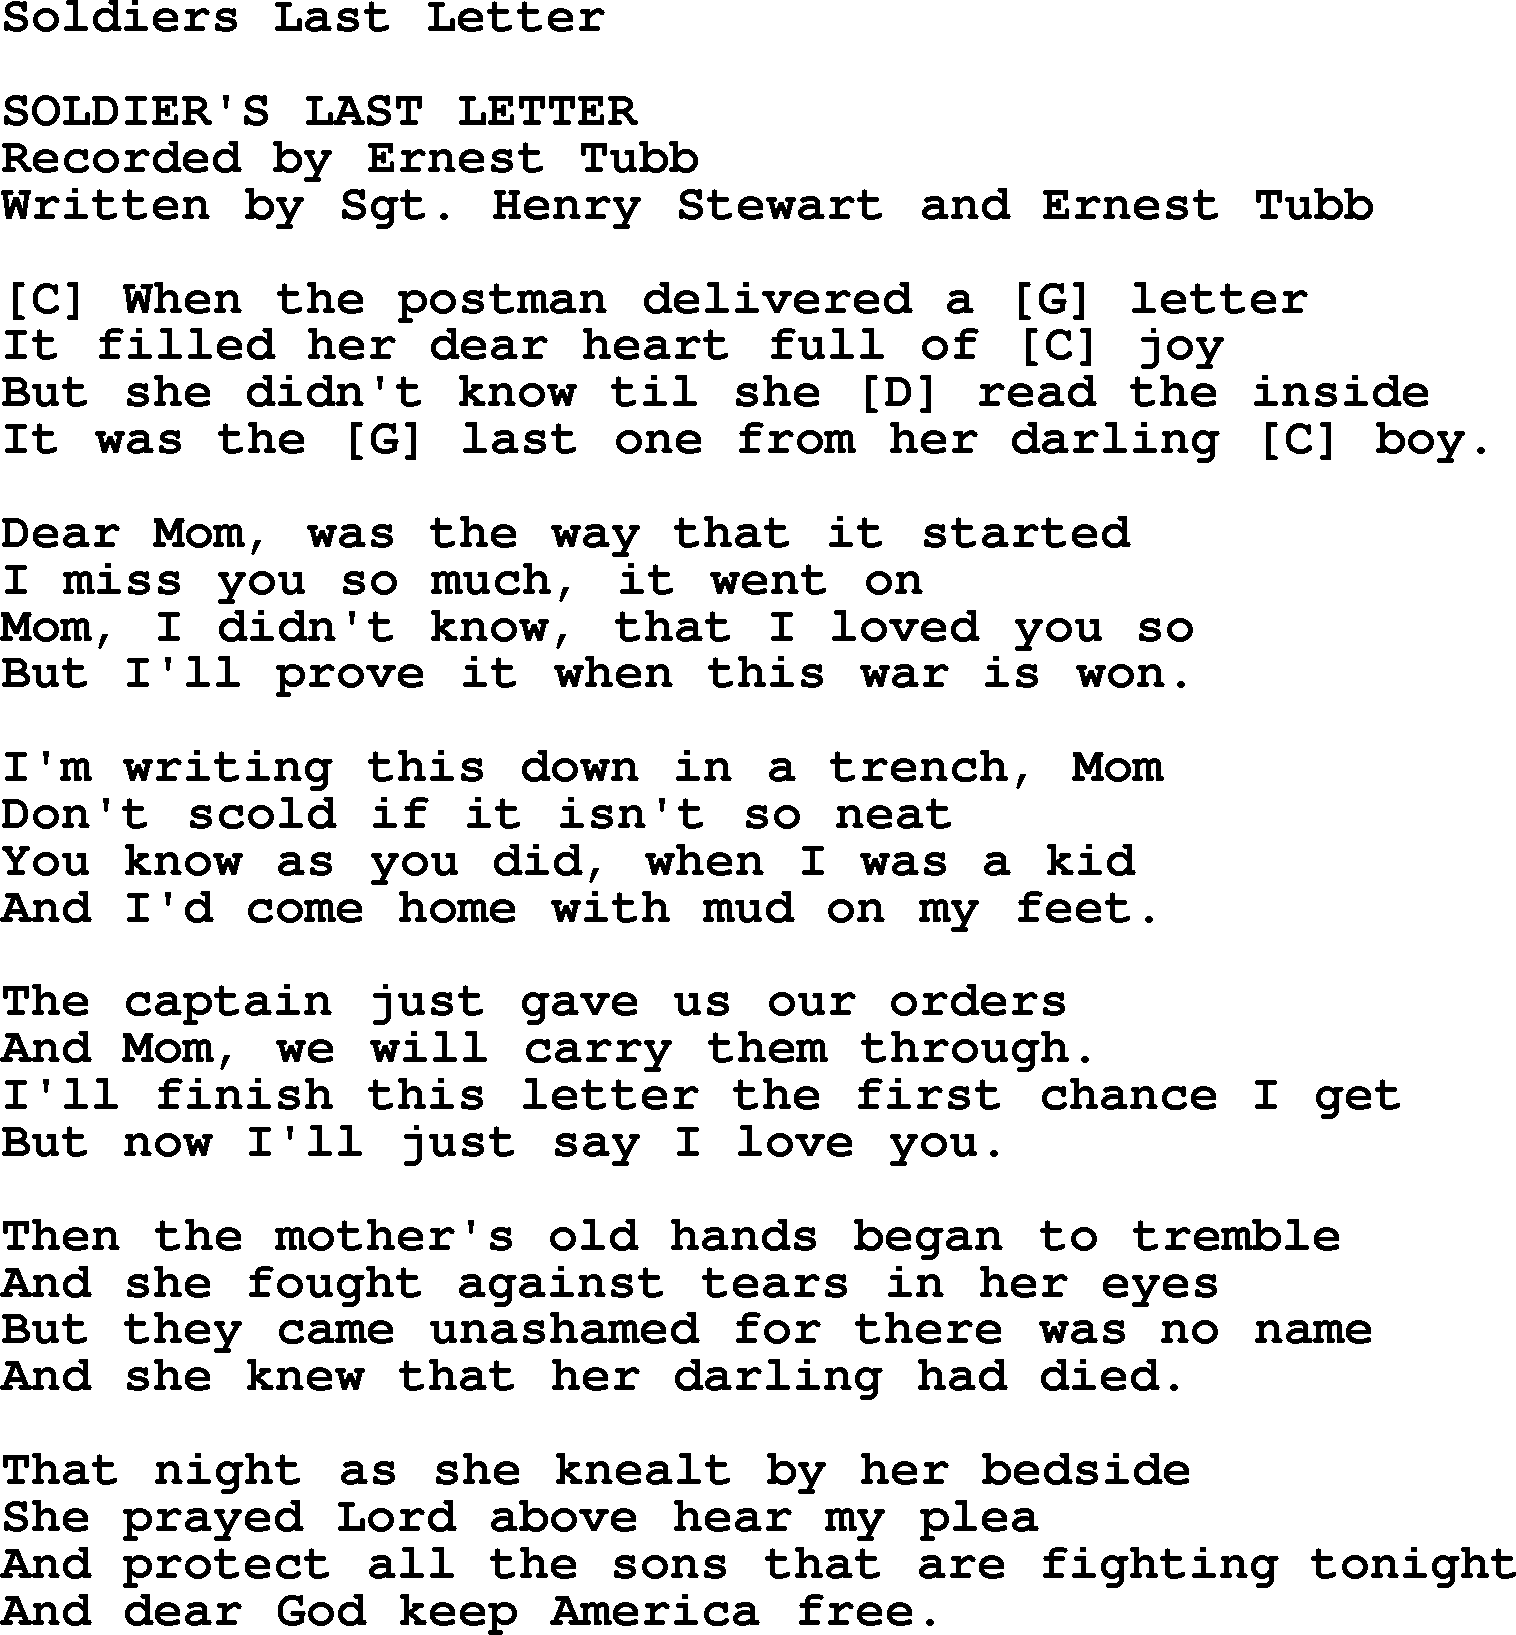 Bluegrass song: Soldiers Last Letter, lyrics and chords